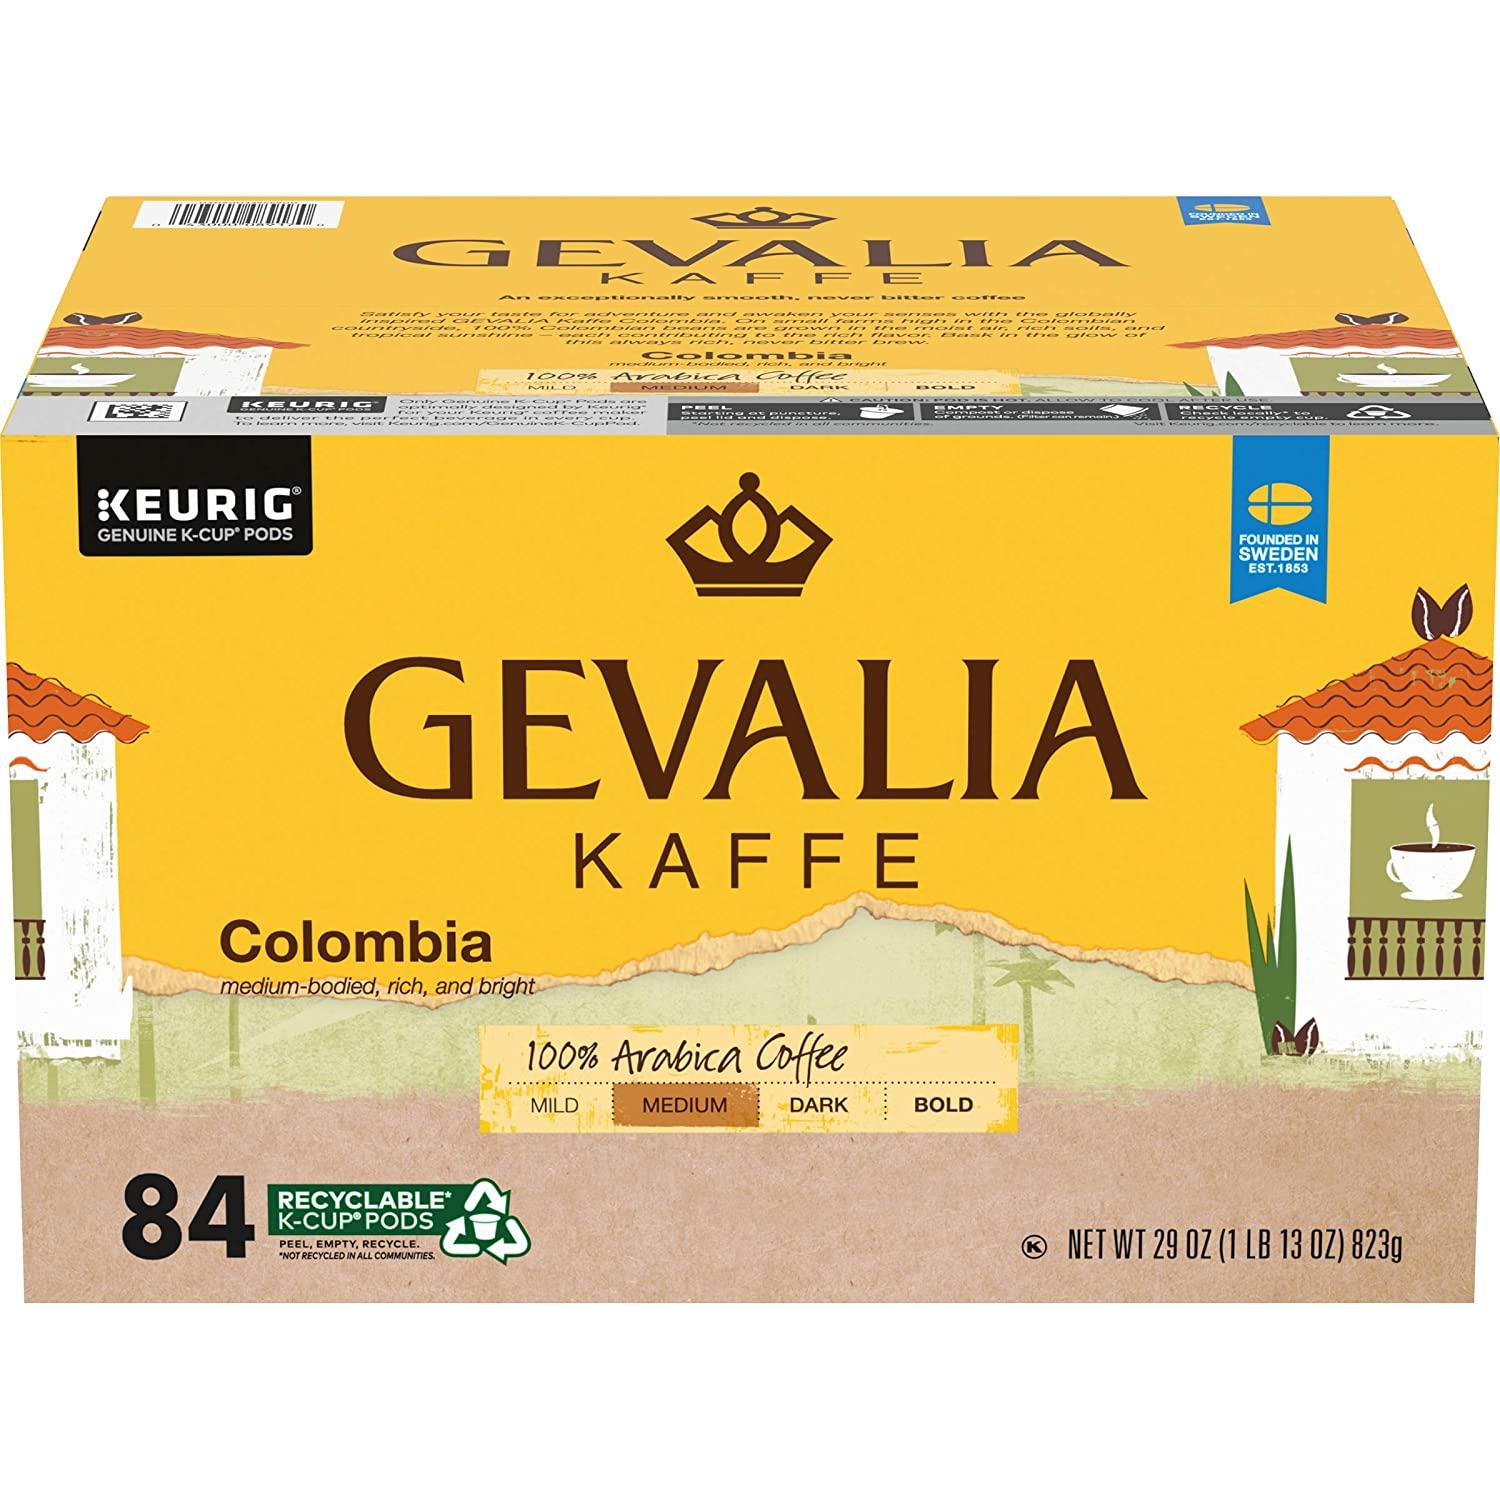 84 Gevalia Colombia Coffee K-Cup Pods for $27.91 Shipped